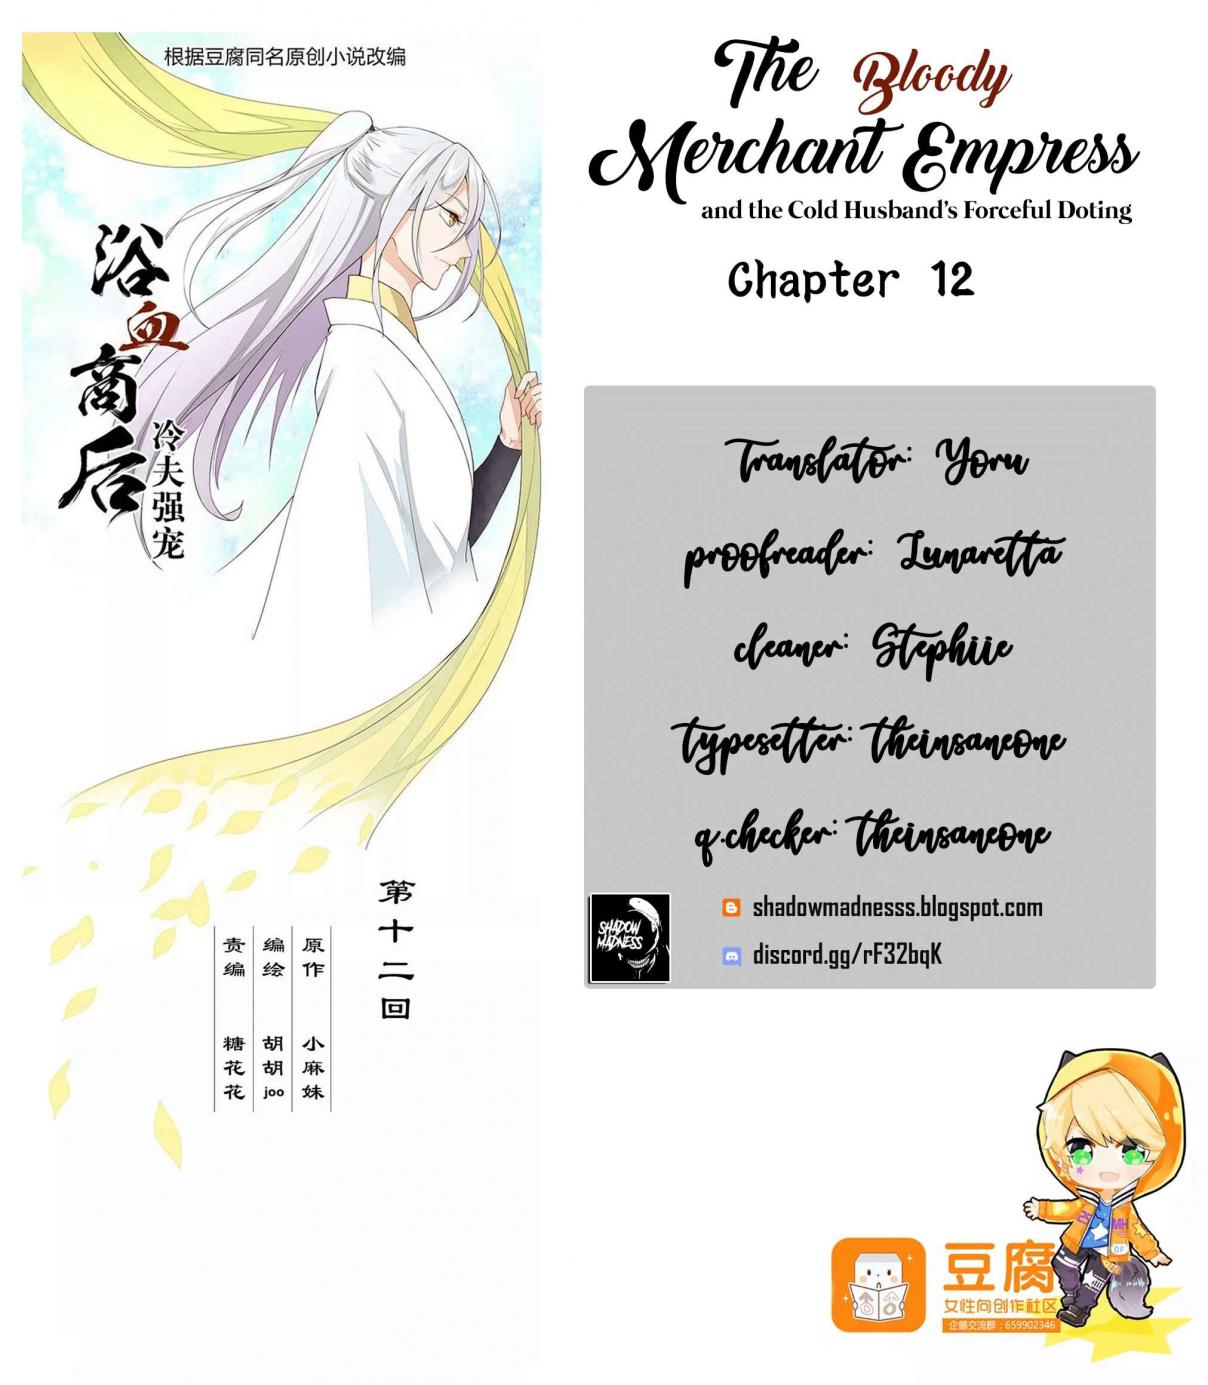 The Bloody Merchant Empress and the Cold Husband's Forceful Doting Ch. 12